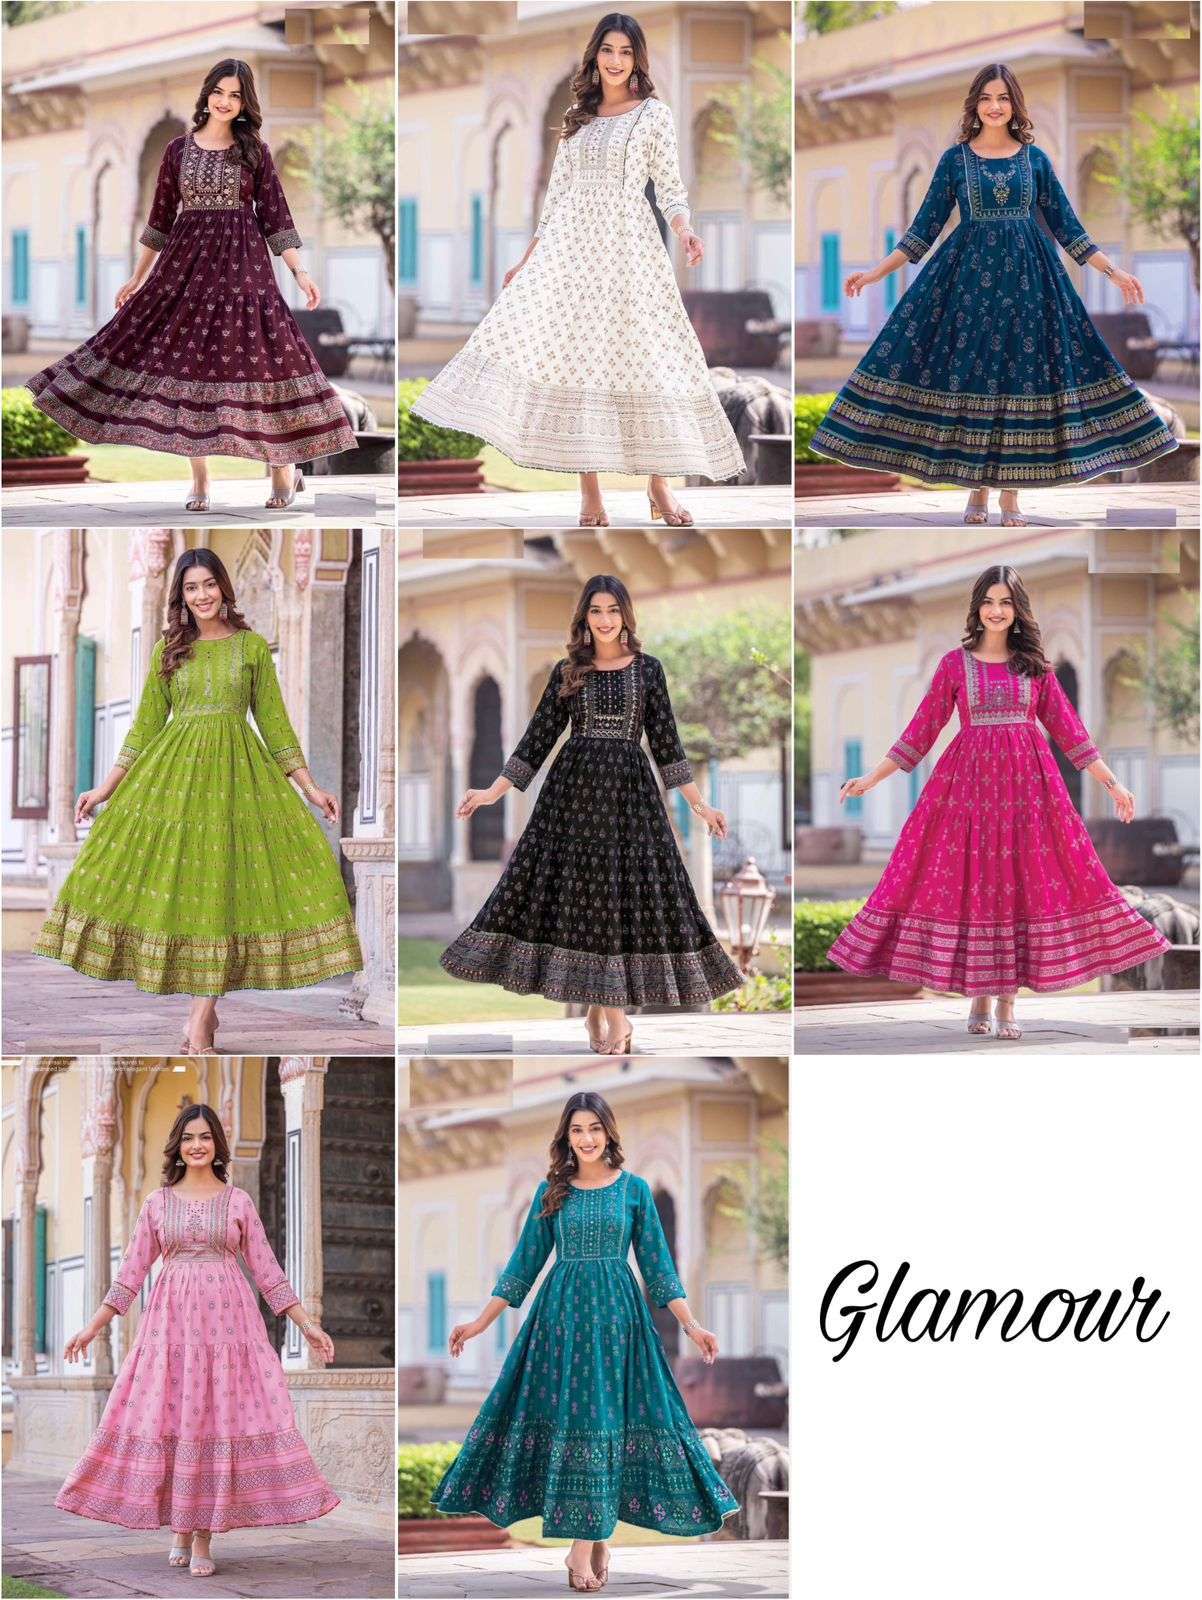 Girls Indian Dresses - Whatsapp 0091-9888686895 for any order or query  #wholesale_shop #Delhi_designer #Beautiful_readymades #suits #lehenga  #plazodresses #readymade_wholesaler | Facebook